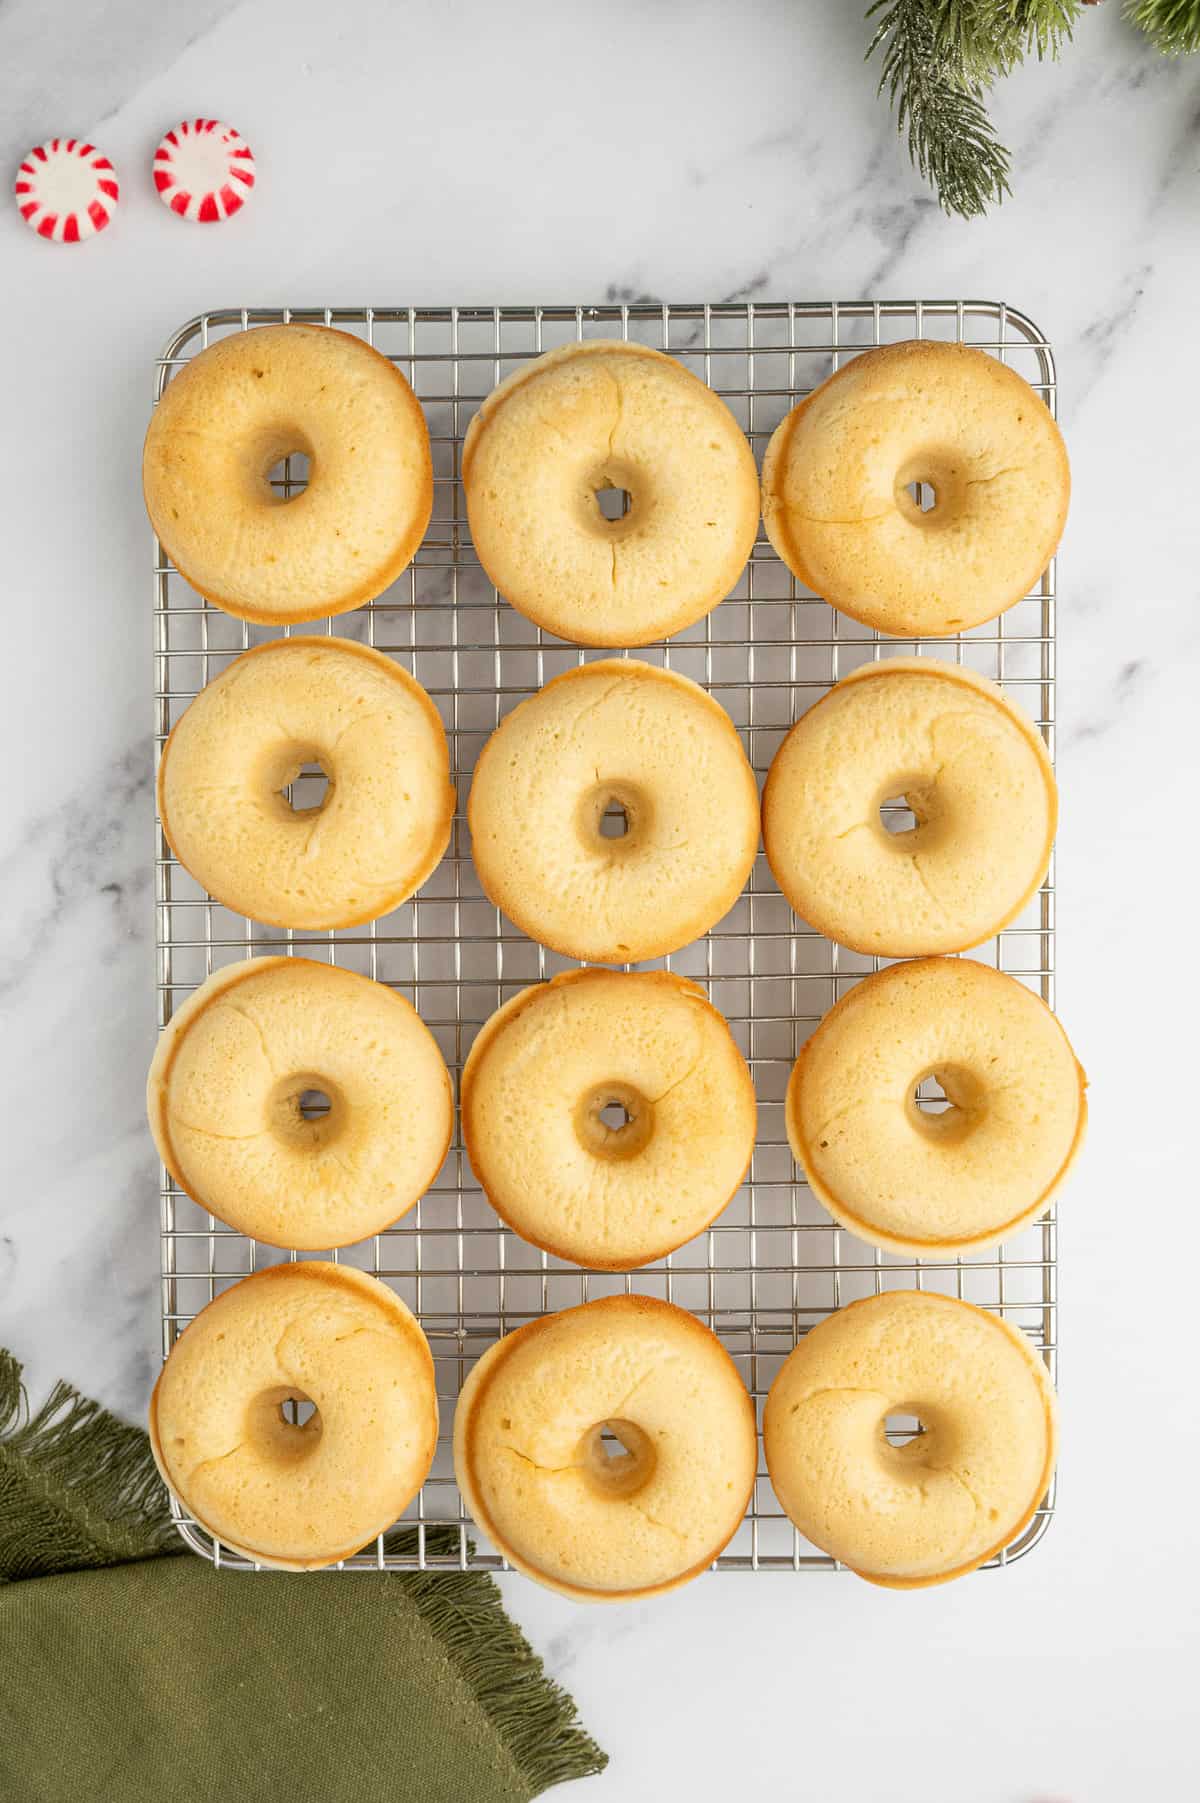 Donuts on cooling rack.